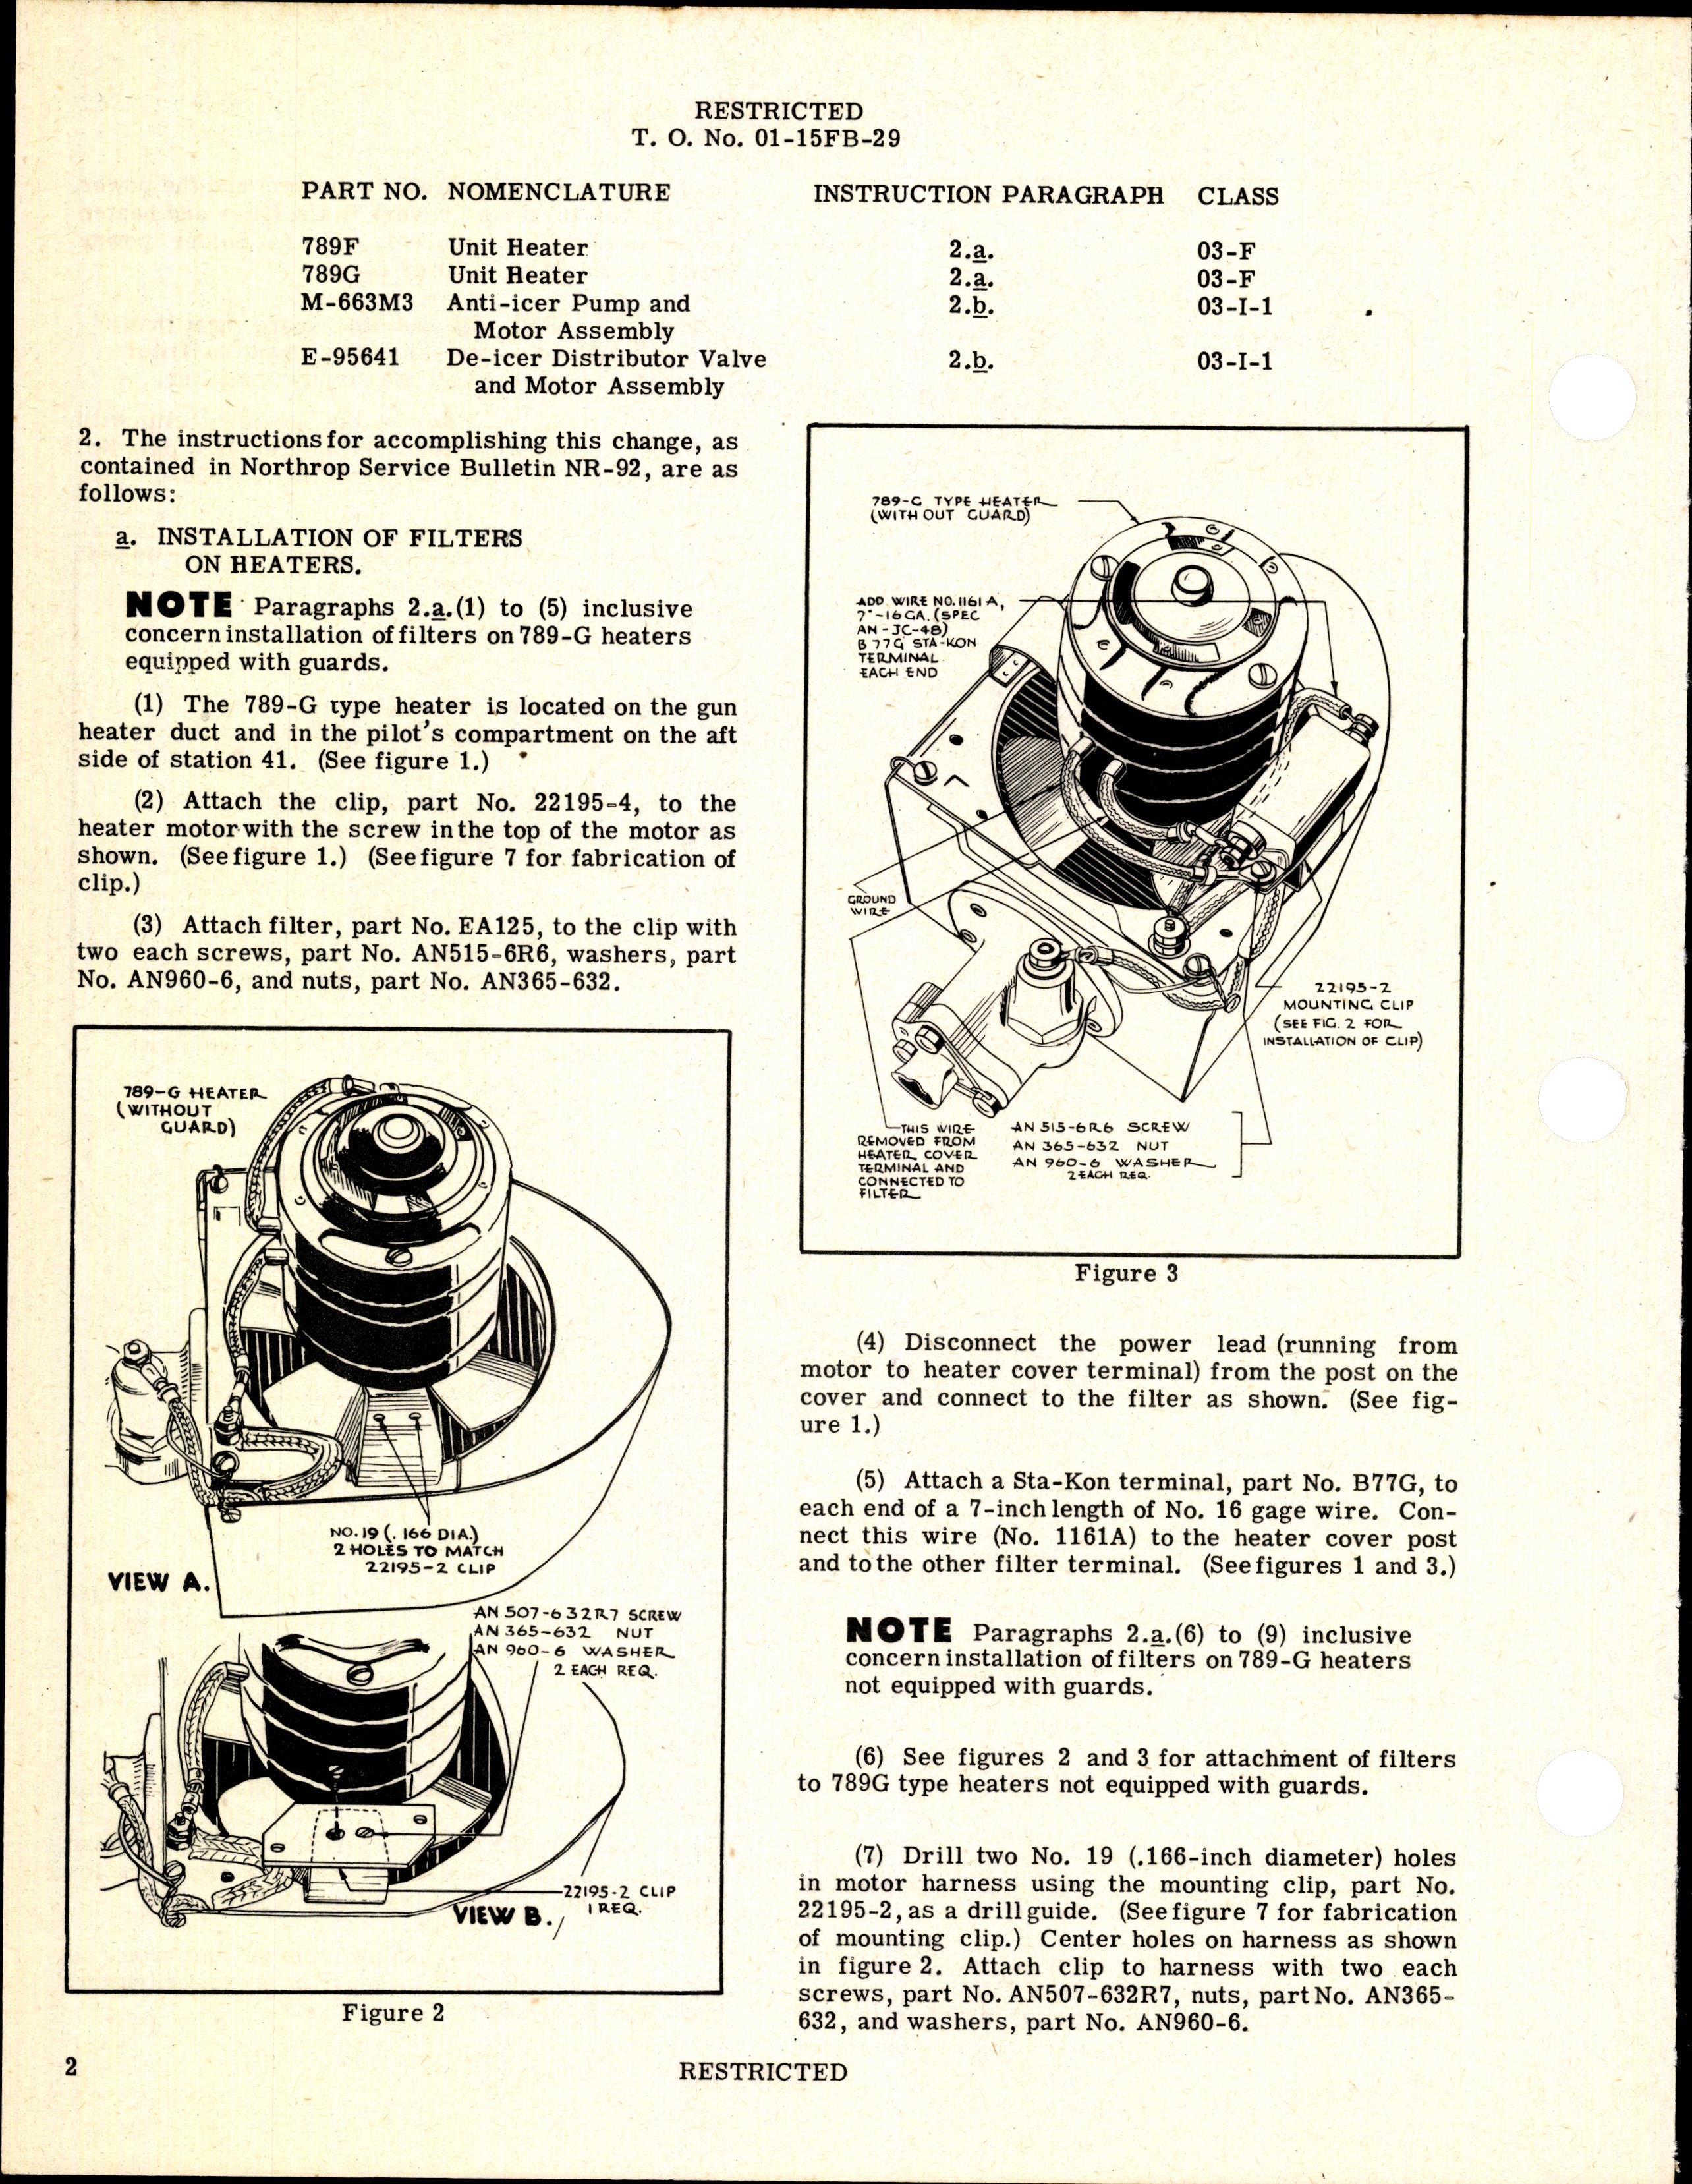 Sample page 2 from AirCorps Library document: Installation of Radio Noise Filters in Heater and Anti-Icer Motors for P-61A